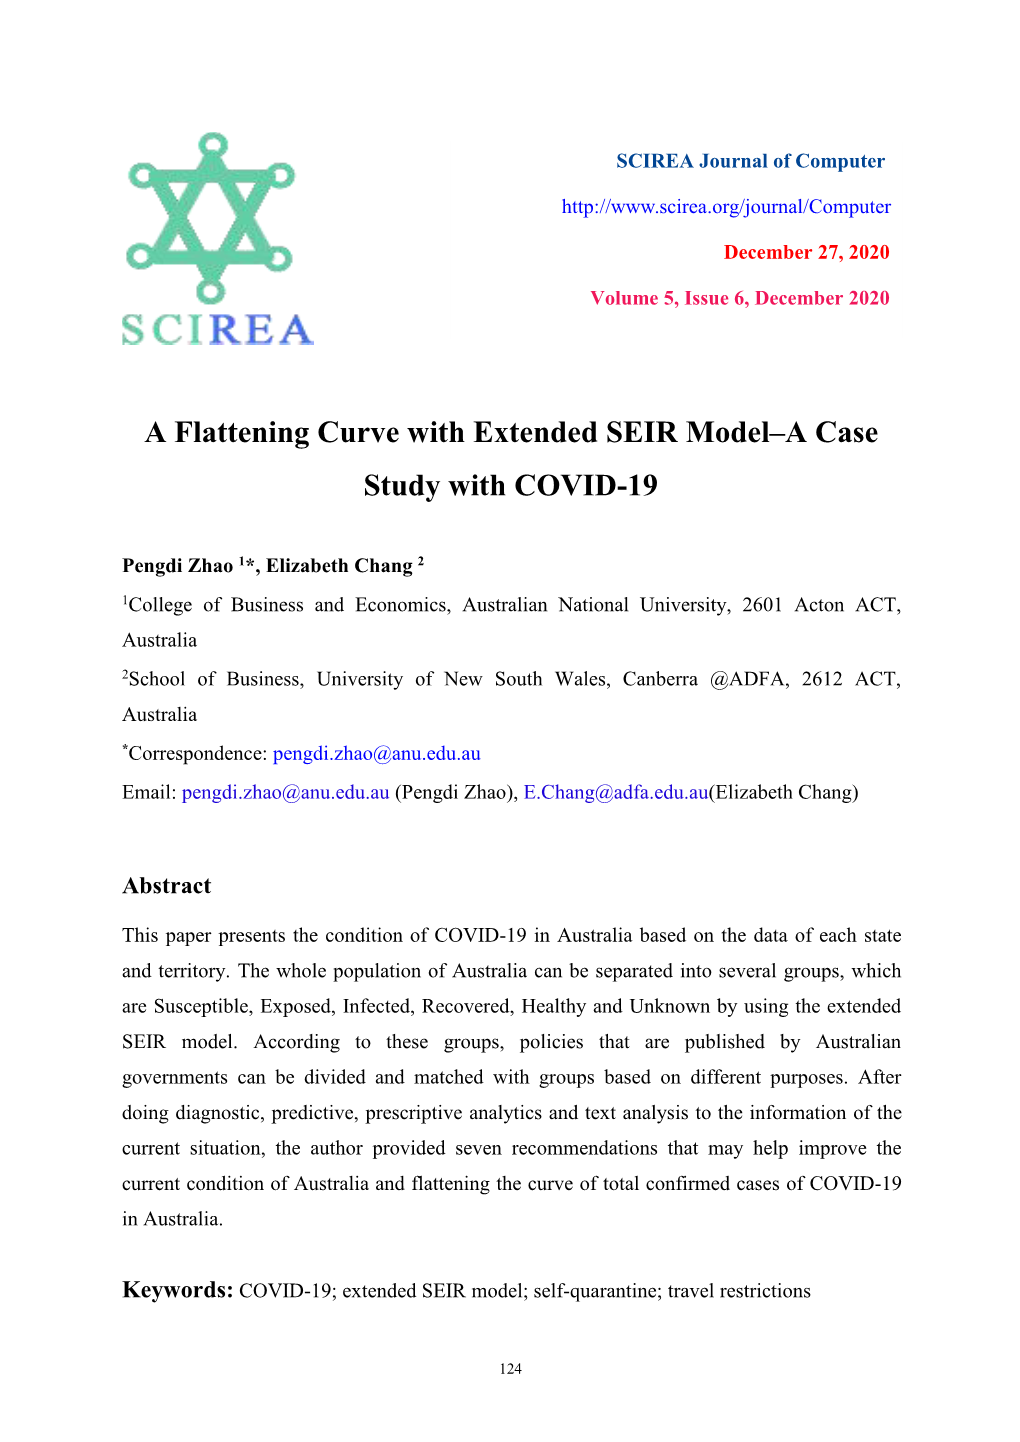 A Flattening Curve with Extended SEIR Model–A Case Study with COVID-19